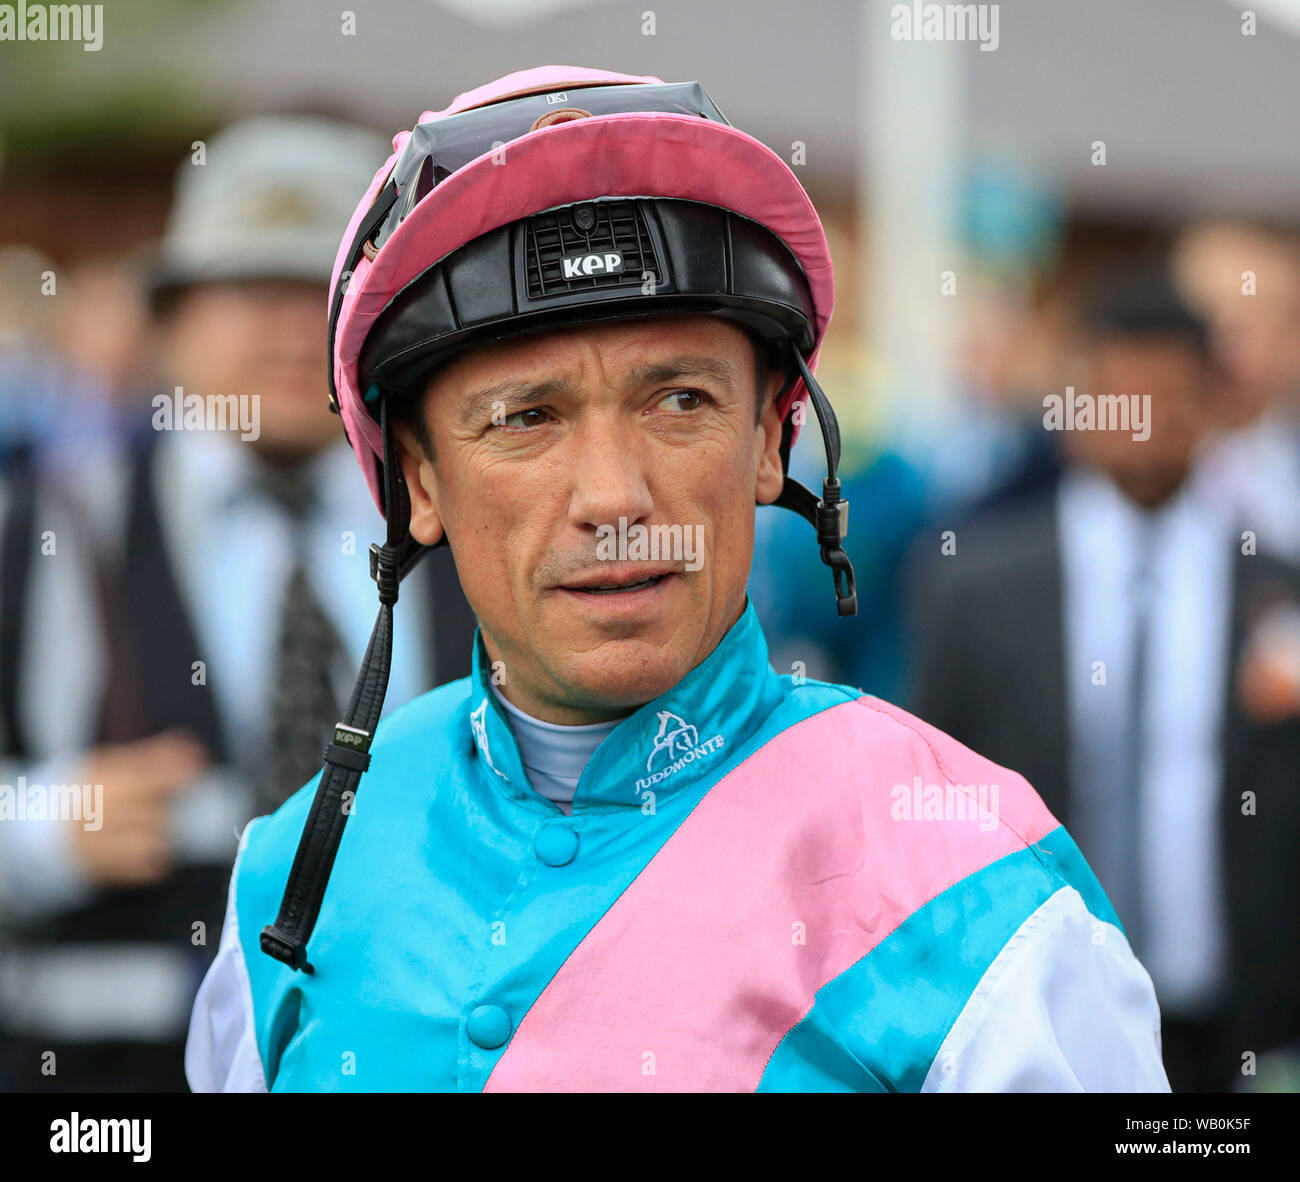 22nd August 2019 , York Racecourse, York, Great Britain; 2019 Darley Yorkshire Oaks/Ladies Day ; Frankie Dettori  Credit Conor Molloy/News Images Stock Photo